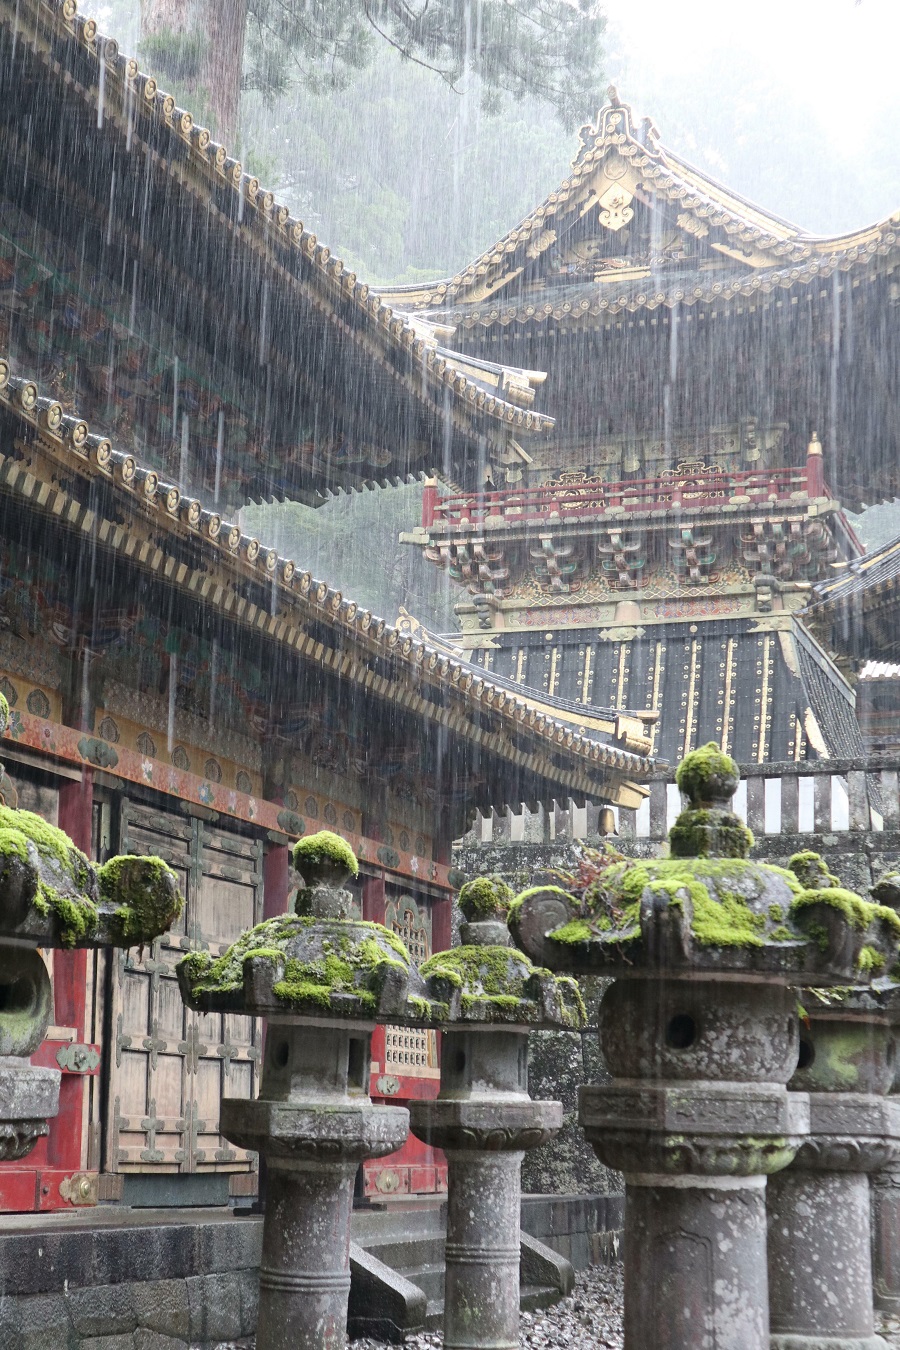 A (Very) Rainy Day In Nikko, Japan